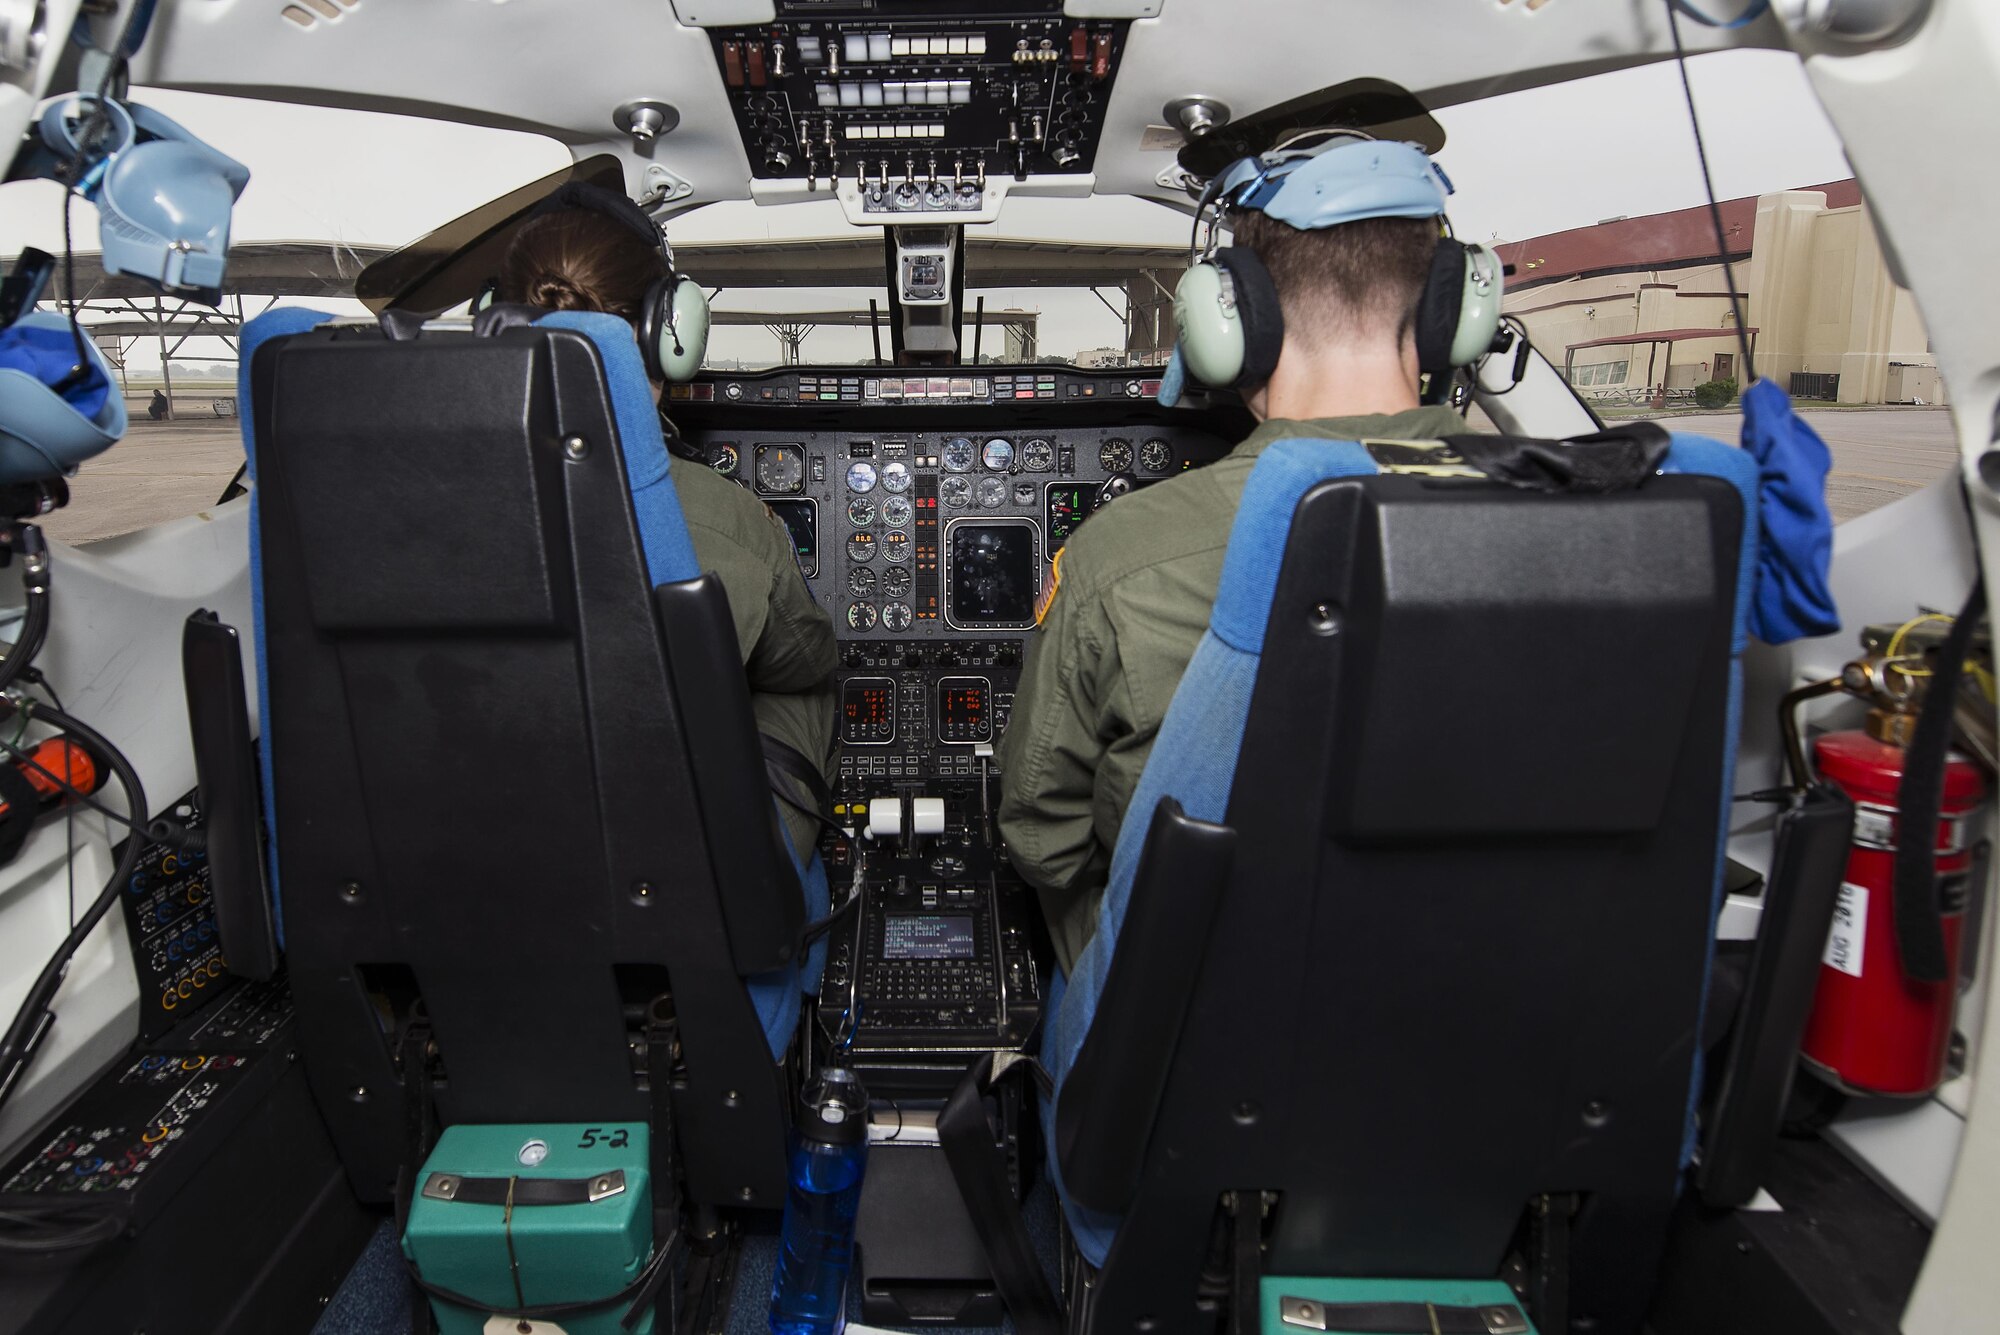 Maj. Ryan Scott, 99th Flying Training Squadron “A” flight commander and T-1A Jayhawk instructor pilot, and 2nd Lt. Aimee St. Cyr, 99th FTS instructor pilot trainee, go through pre-flight procedures before a training mission at Joint Base San Antonio-Randolph May 16, 2016. The training mission consisted of Scott and St. Cyr performing simulated air refueling and airdrops.